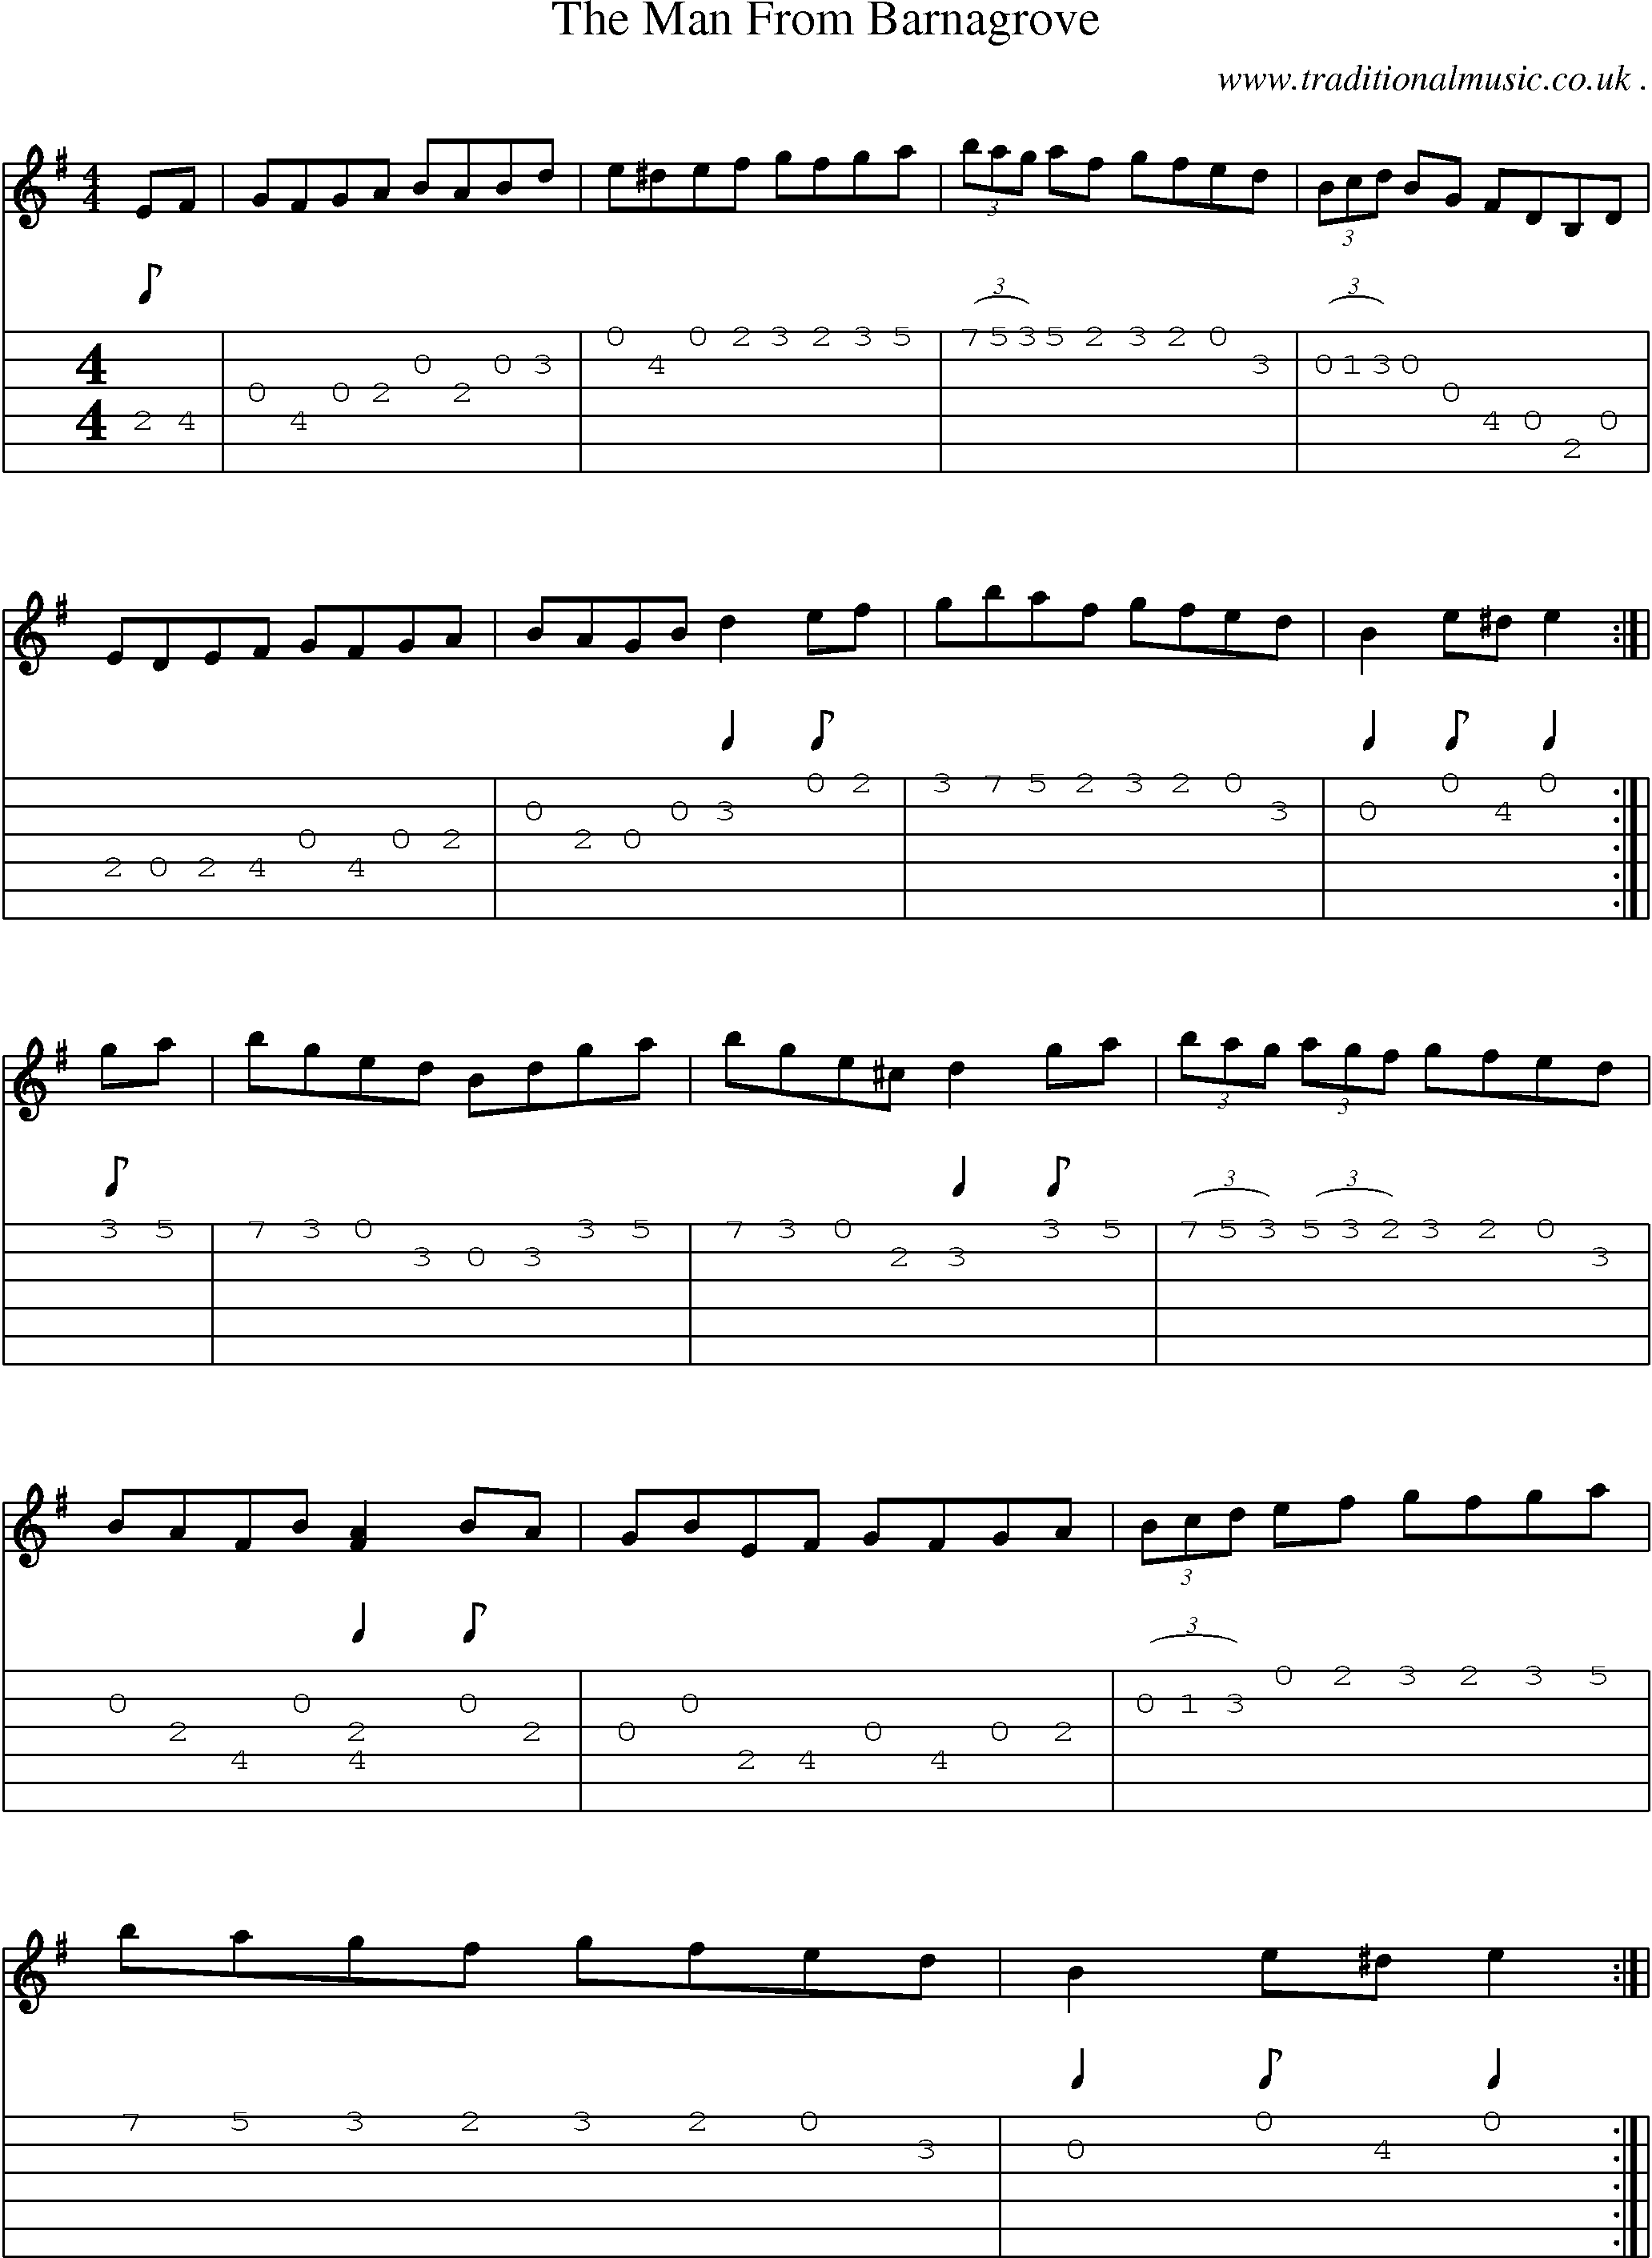 Sheet-Music and Guitar Tabs for The Man From Barnagrove